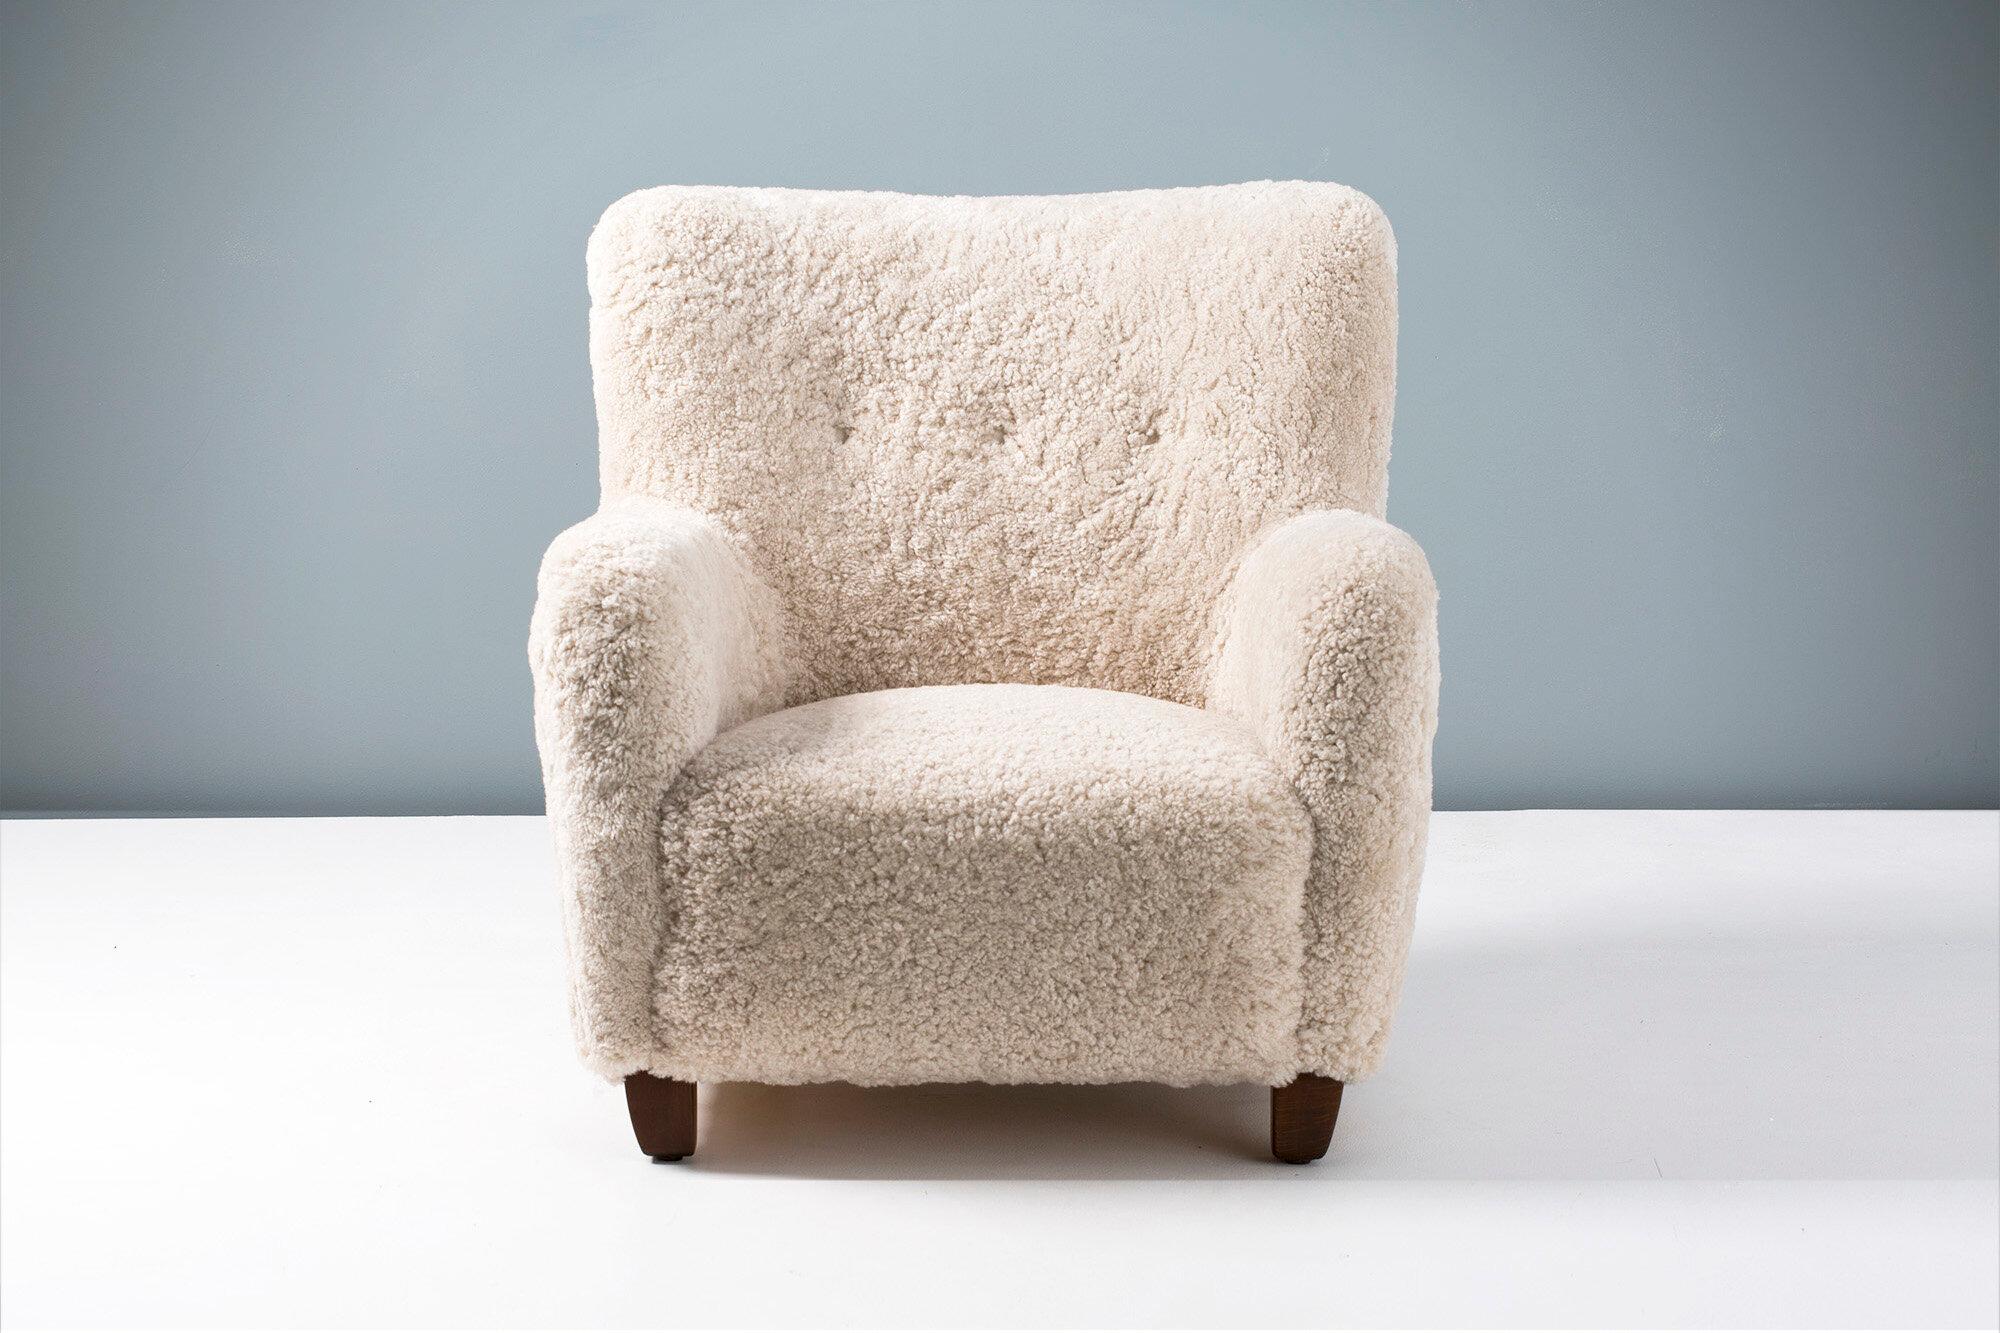 Jens Houmøller Klemmensen - 1939 Armchair

This armchair is a variant of the model first presented at the 1936 Cabinetmakers’ Guild Exhibition in Copenhagen and designed by award-winning Danish architect Jens Houmøller Klemmensen. This variant was